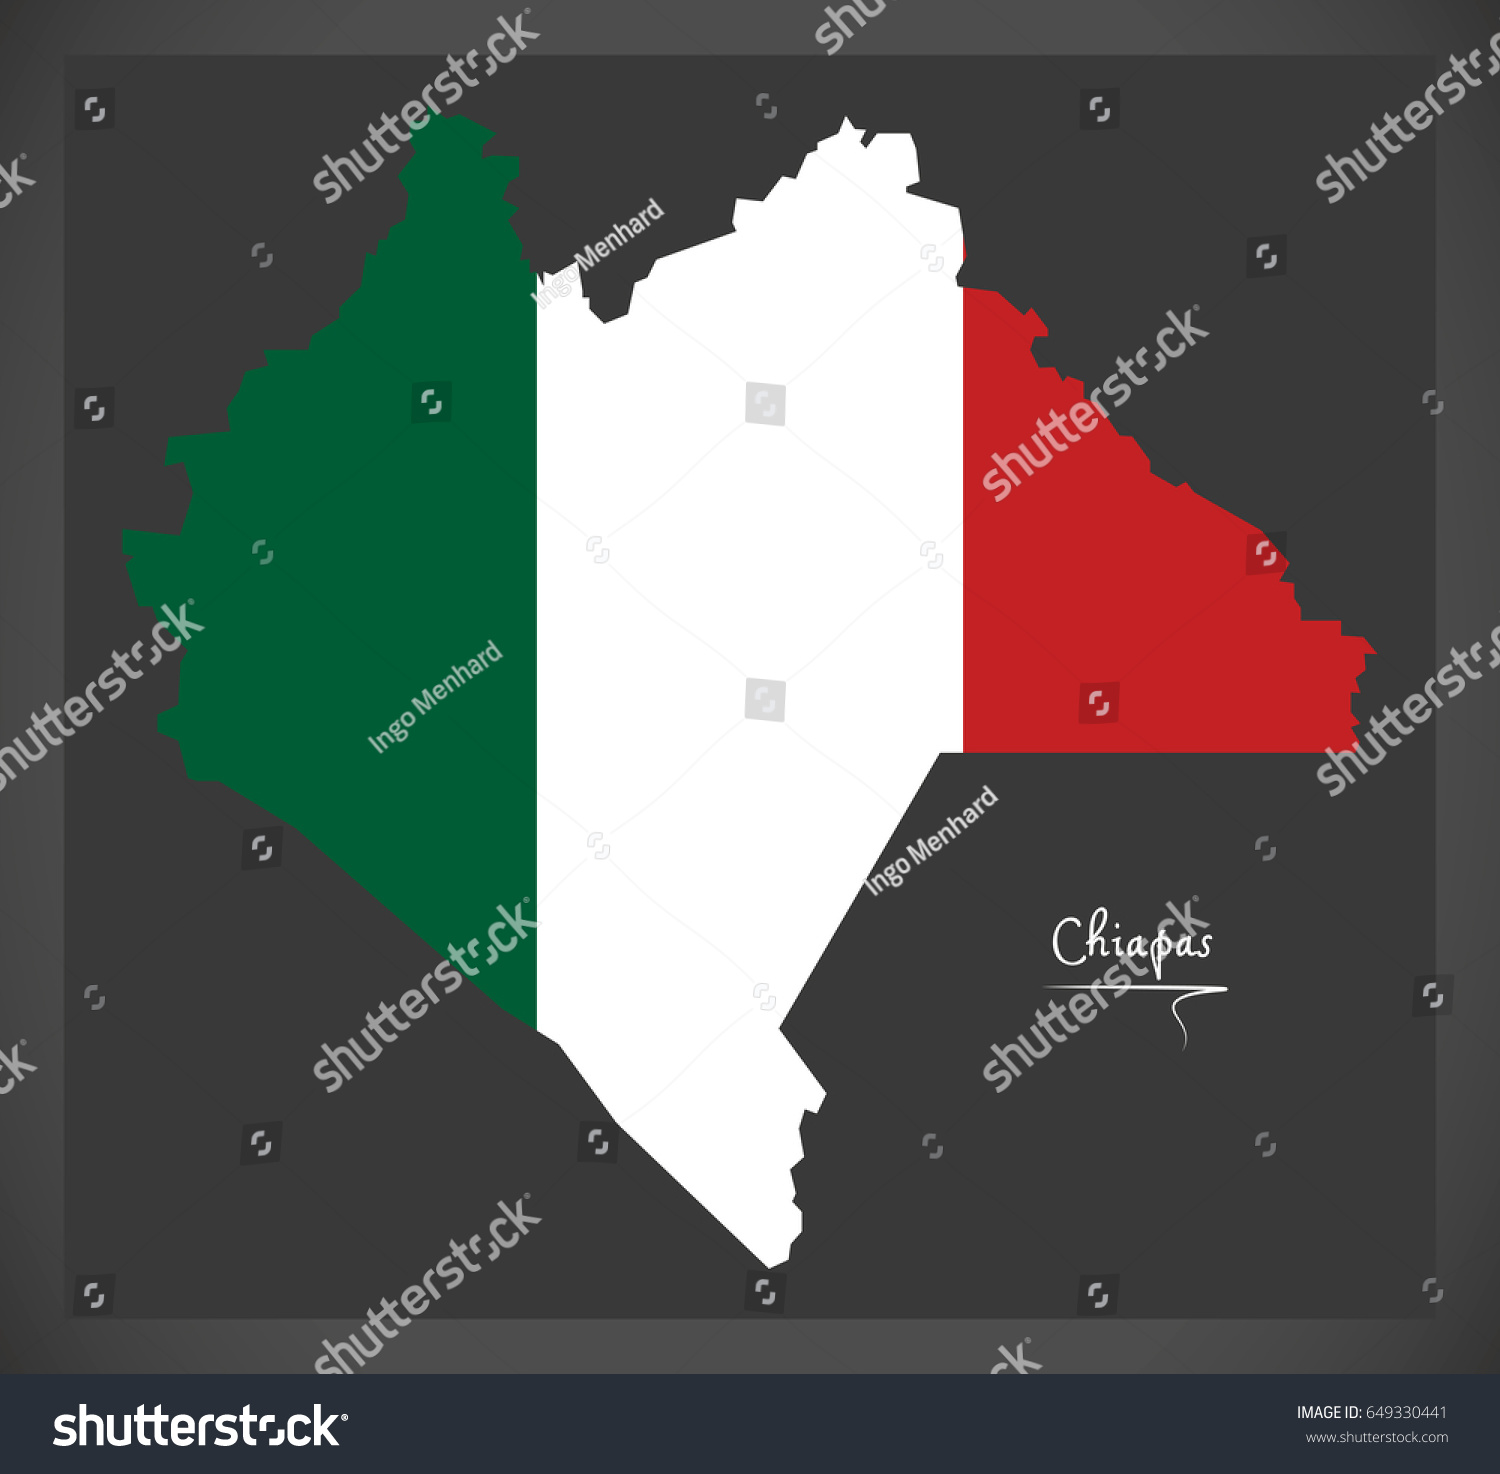 Chiapas Map With Mexican National Flag Royalty Free Stock Vector 649330441 5026